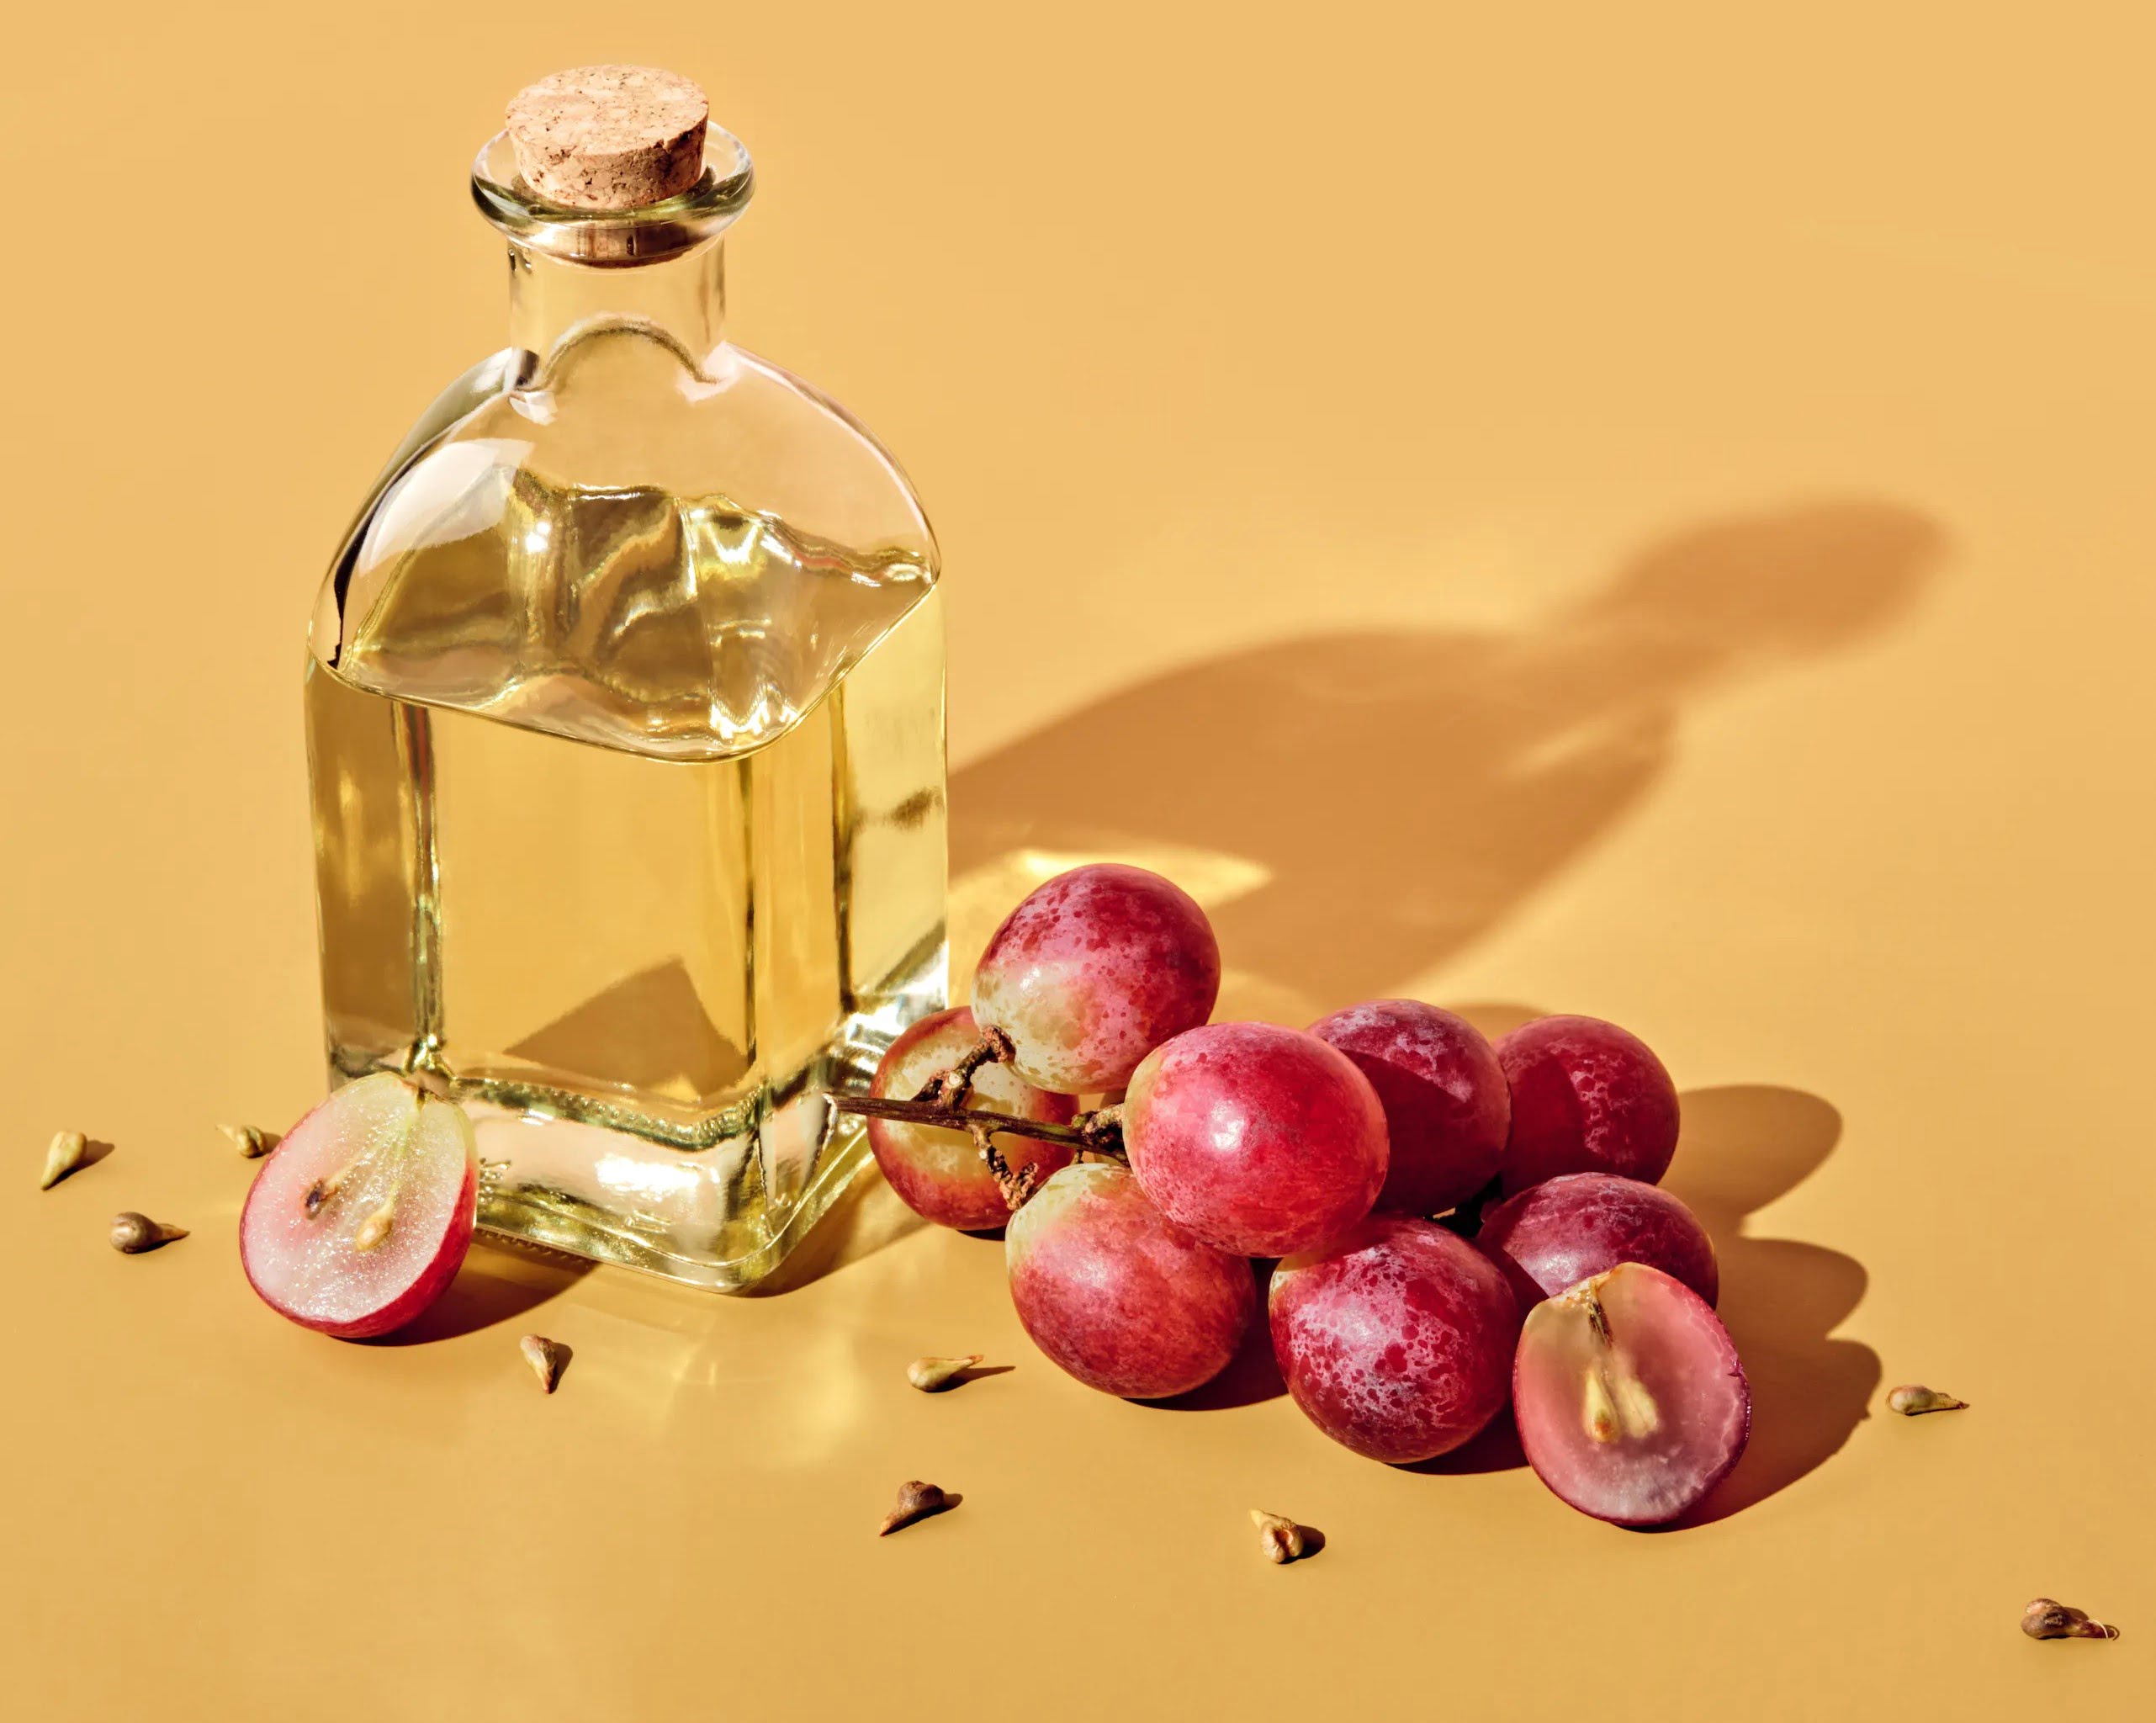 How To Make Grape Seed Oil